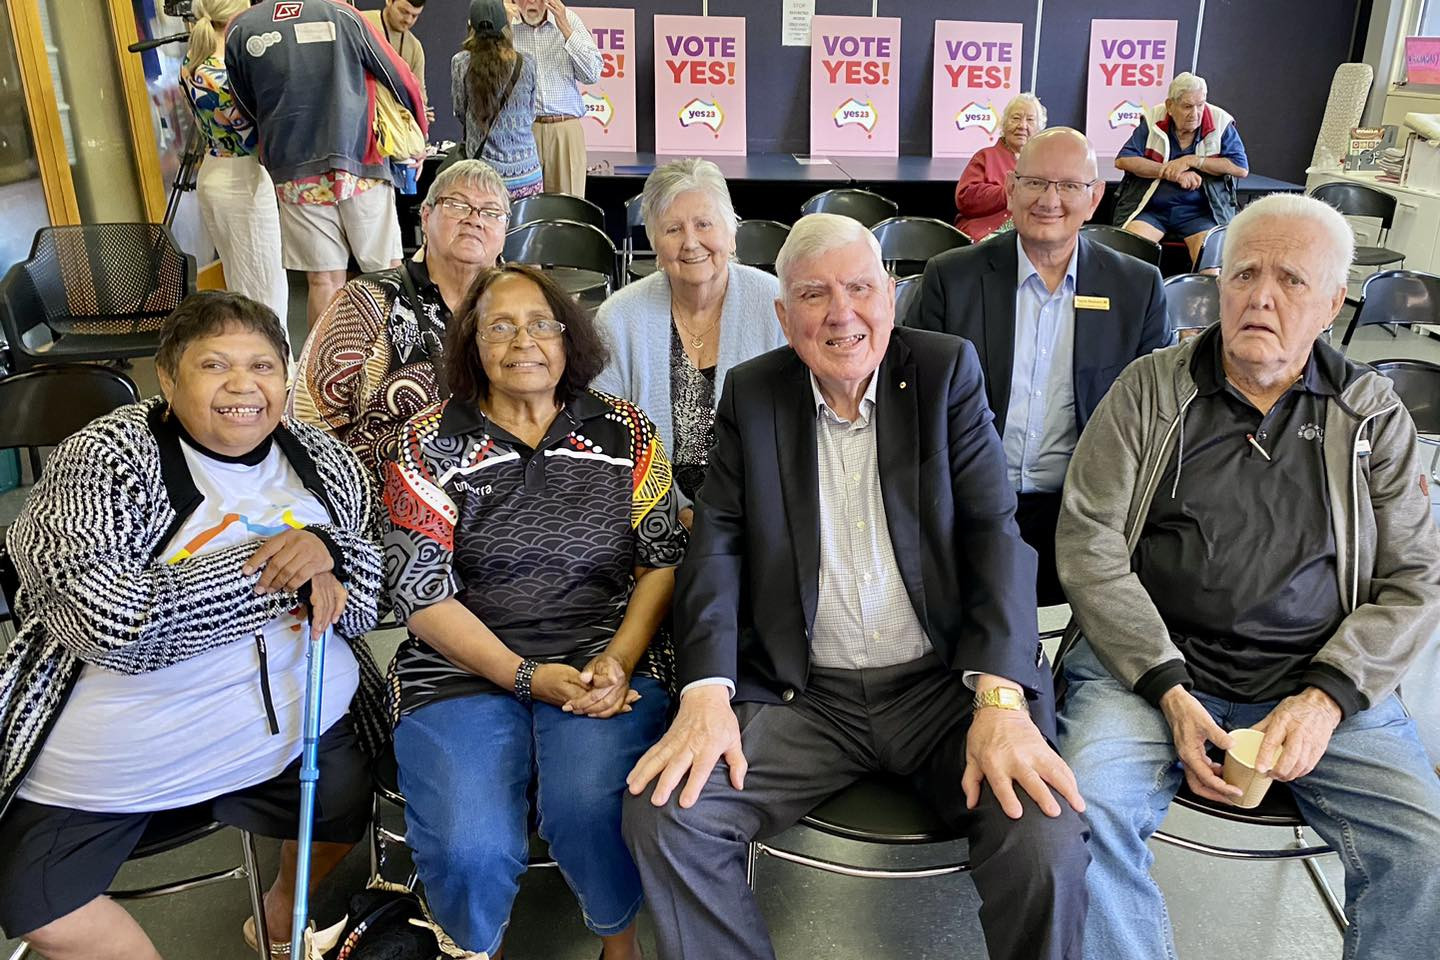 Federal Member for Blair Shayne Neumann held a series of community forums on the Voice to Parliament last week with seniors advocate Everald Compton ahead of the referendum on 14 October.